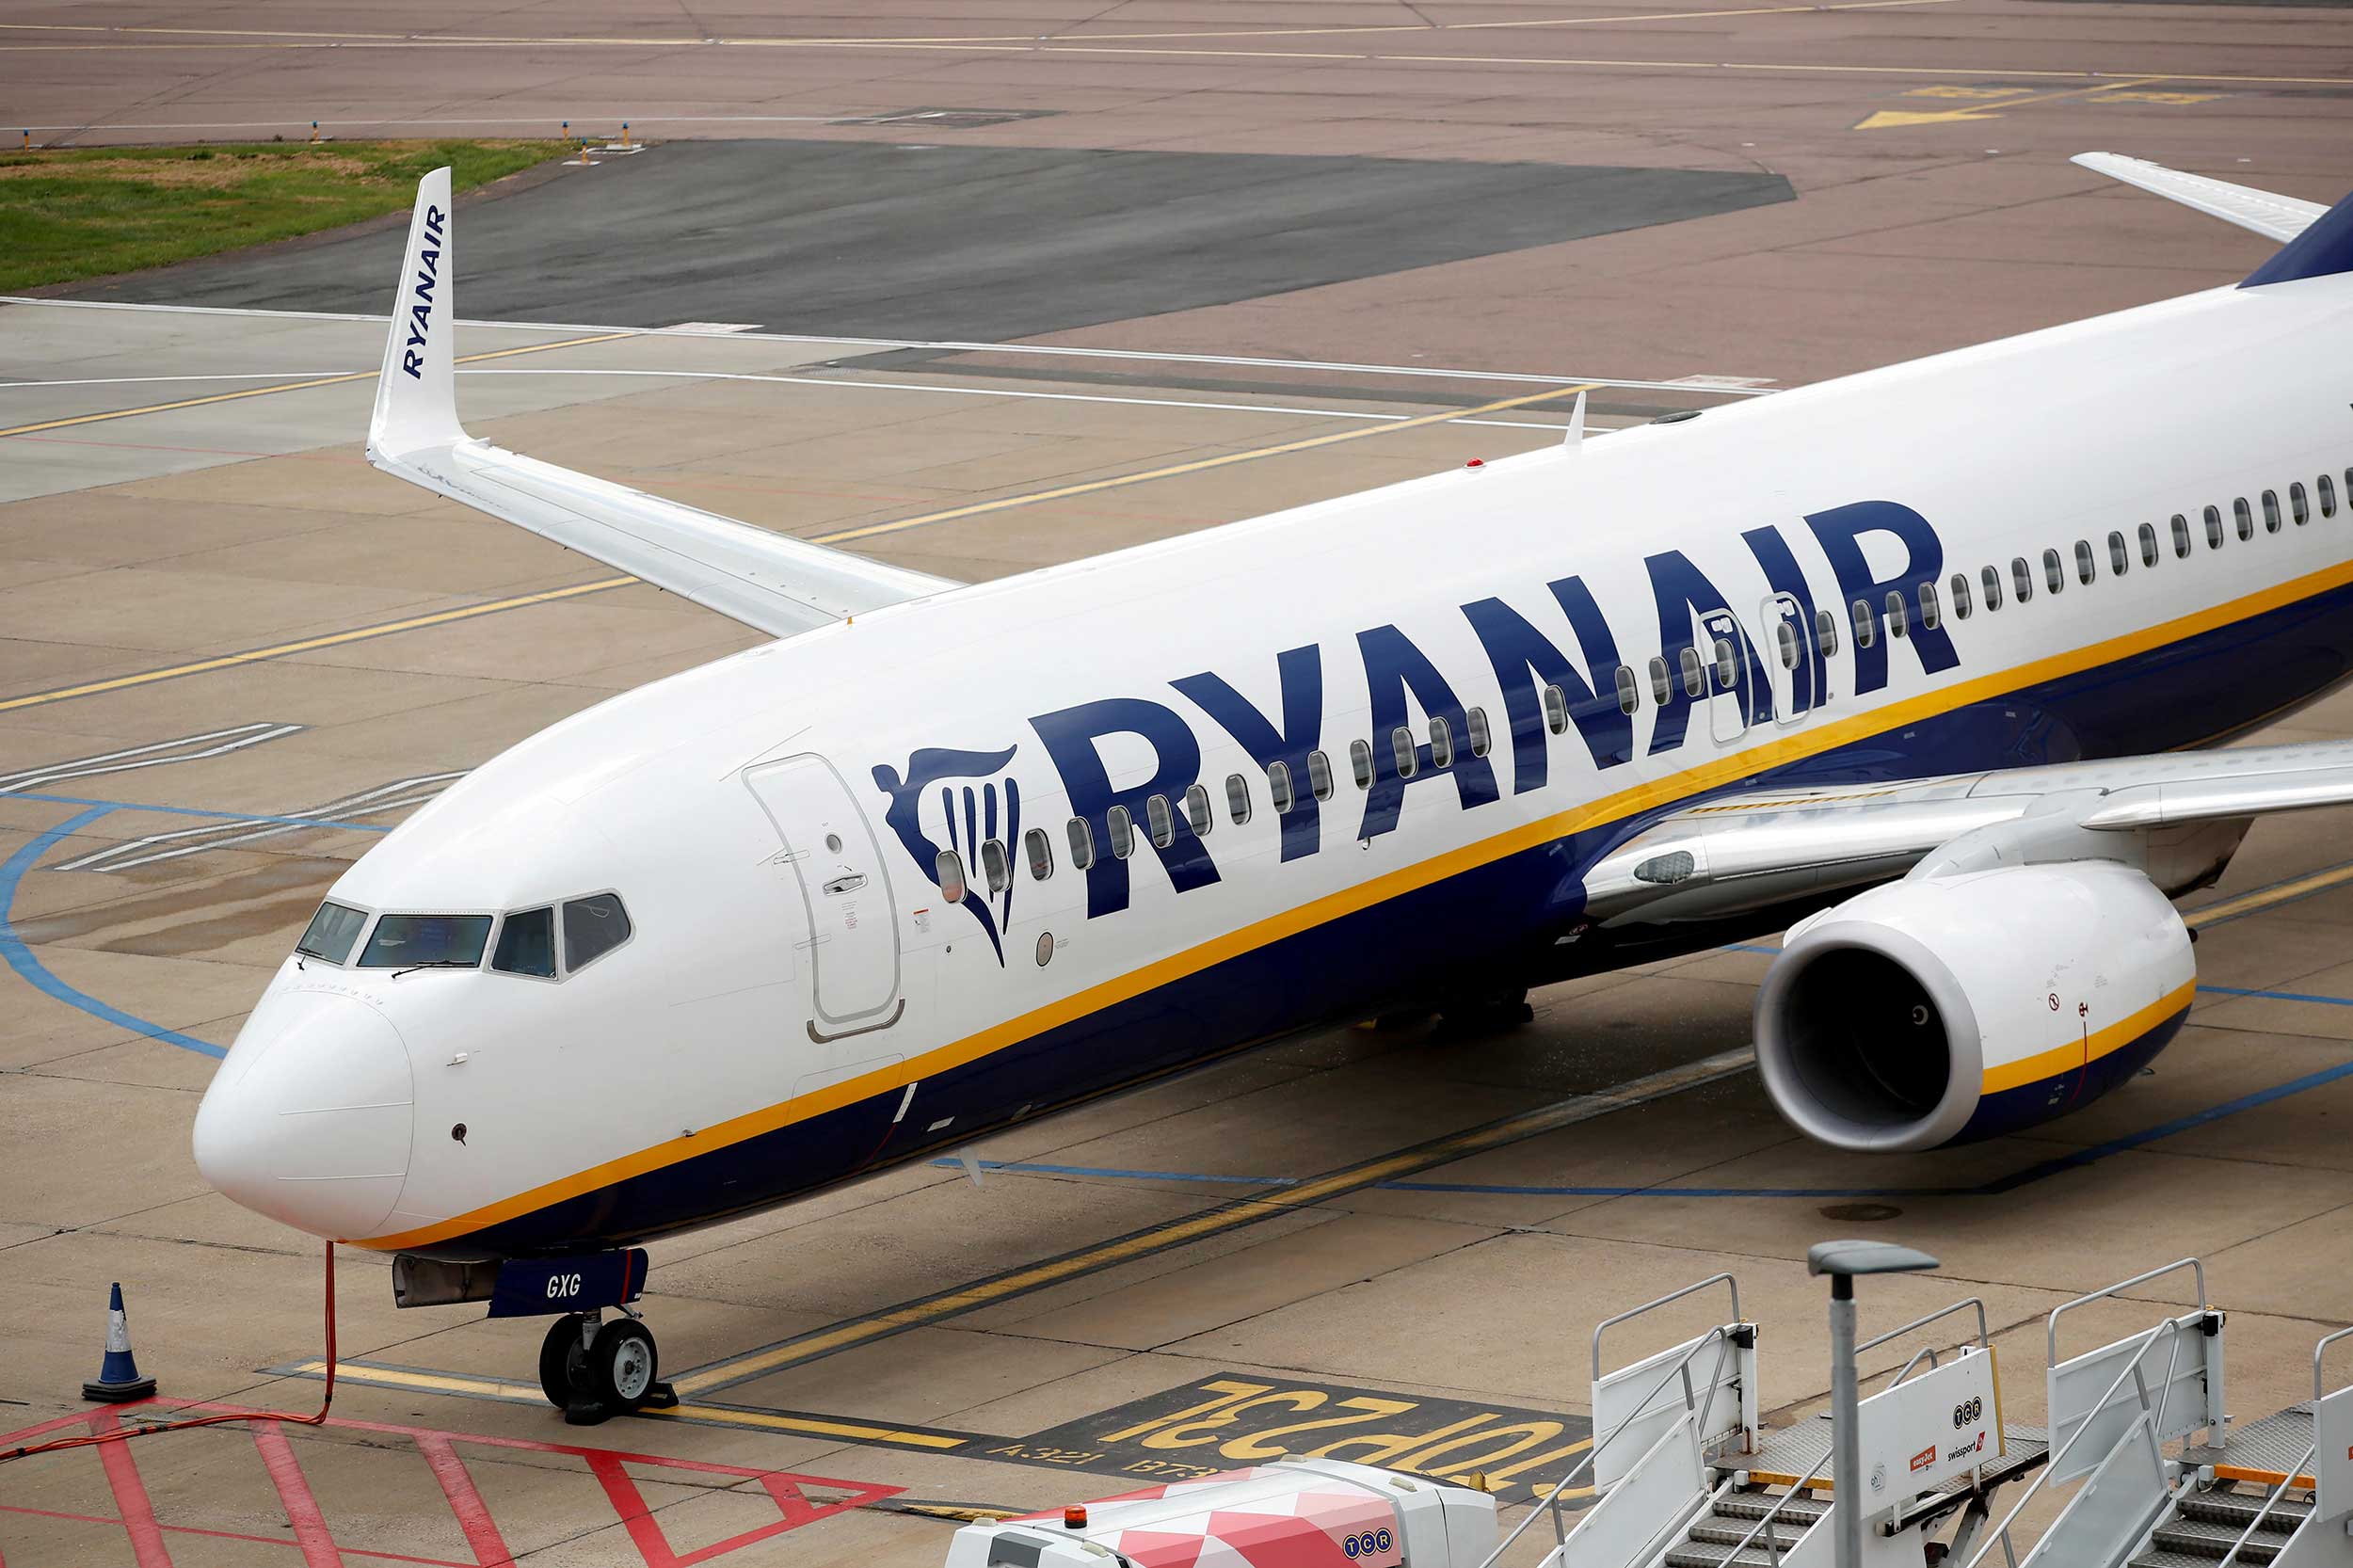 Ryanair expects to be operating 800 aircraft by 2034